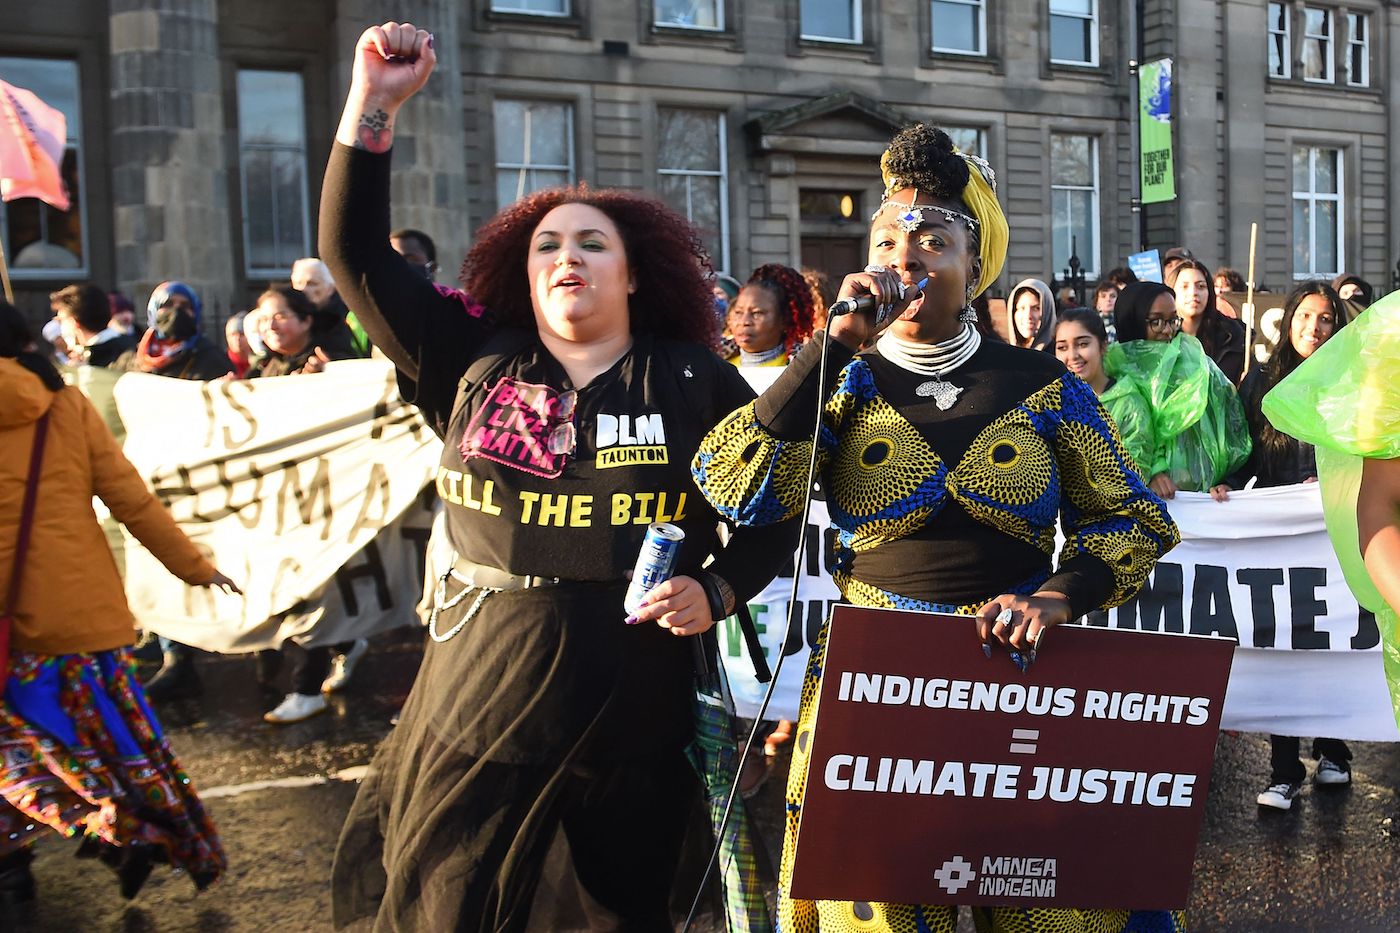 two women stand in protest. one woman has a black lives matter shirt on and the other is carrying a sign that says indigenous rights equal climate justice.